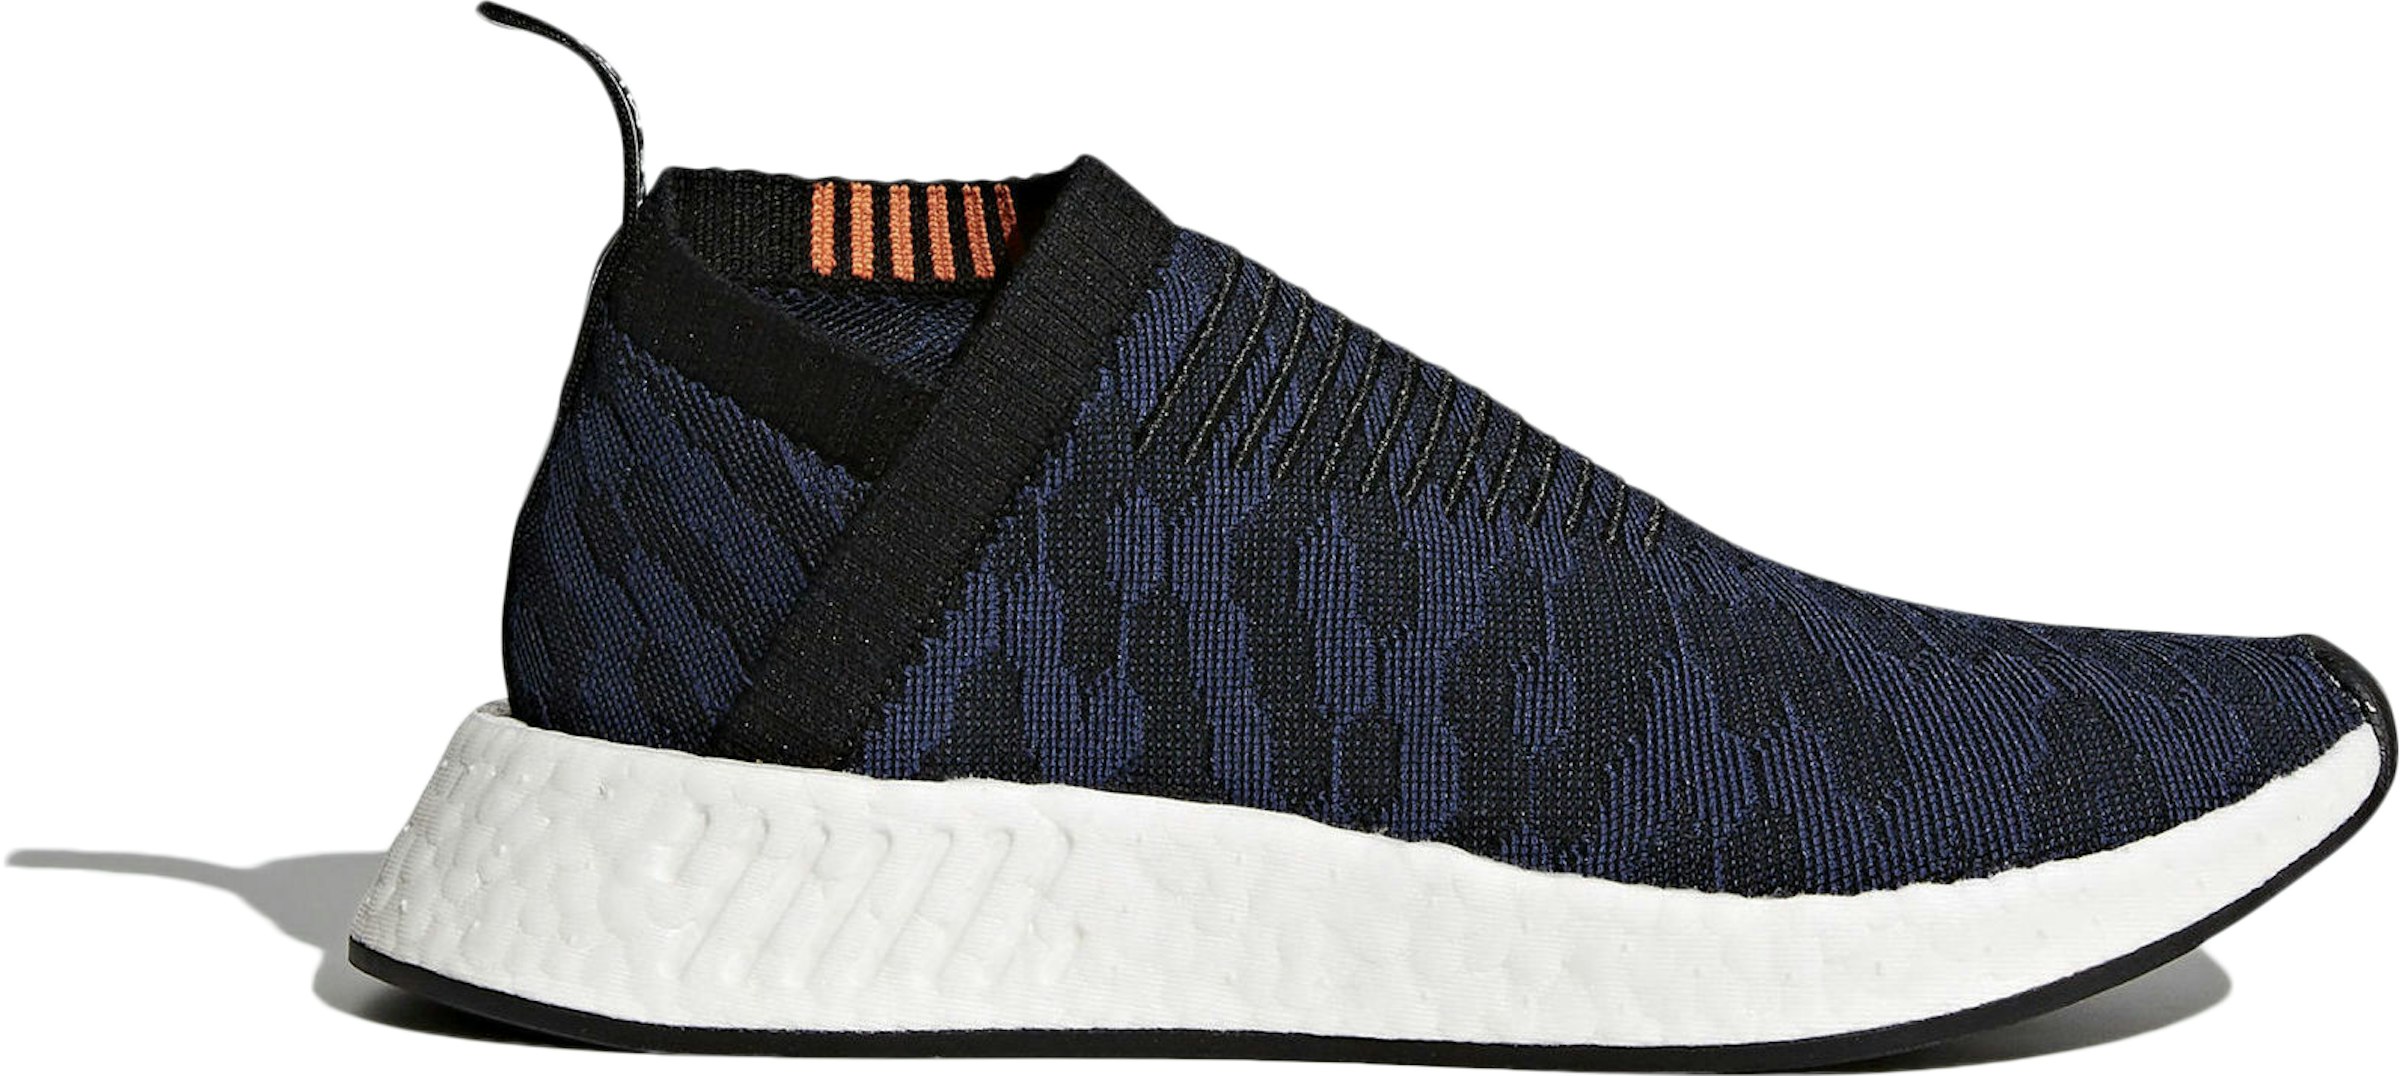 Buy adidas NMD Shoes New - StockX